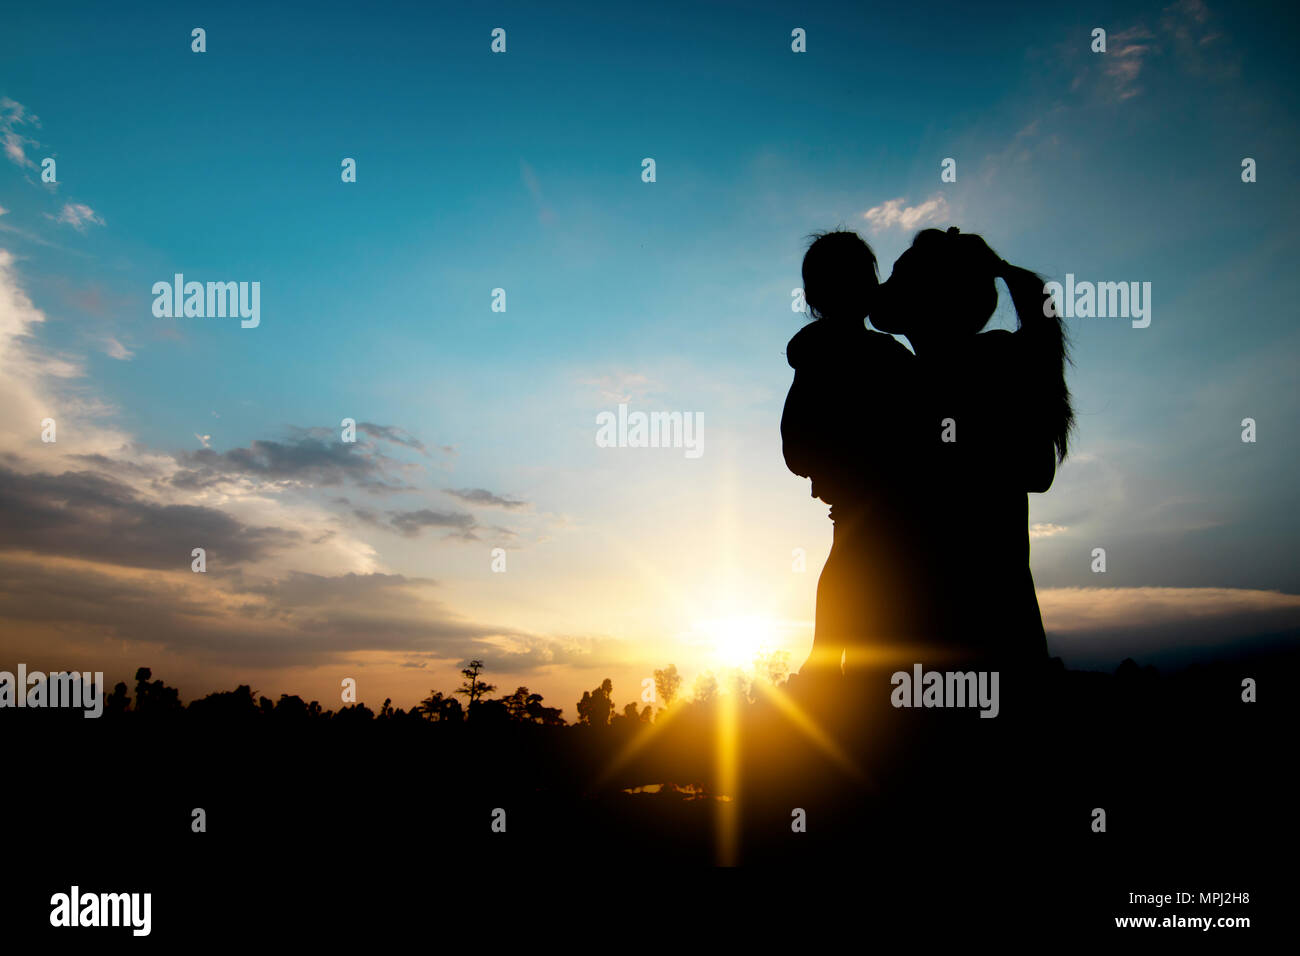 Family and Single mom concept, silhouette of women carrying daughter and kiss her in sunset Stock Photo